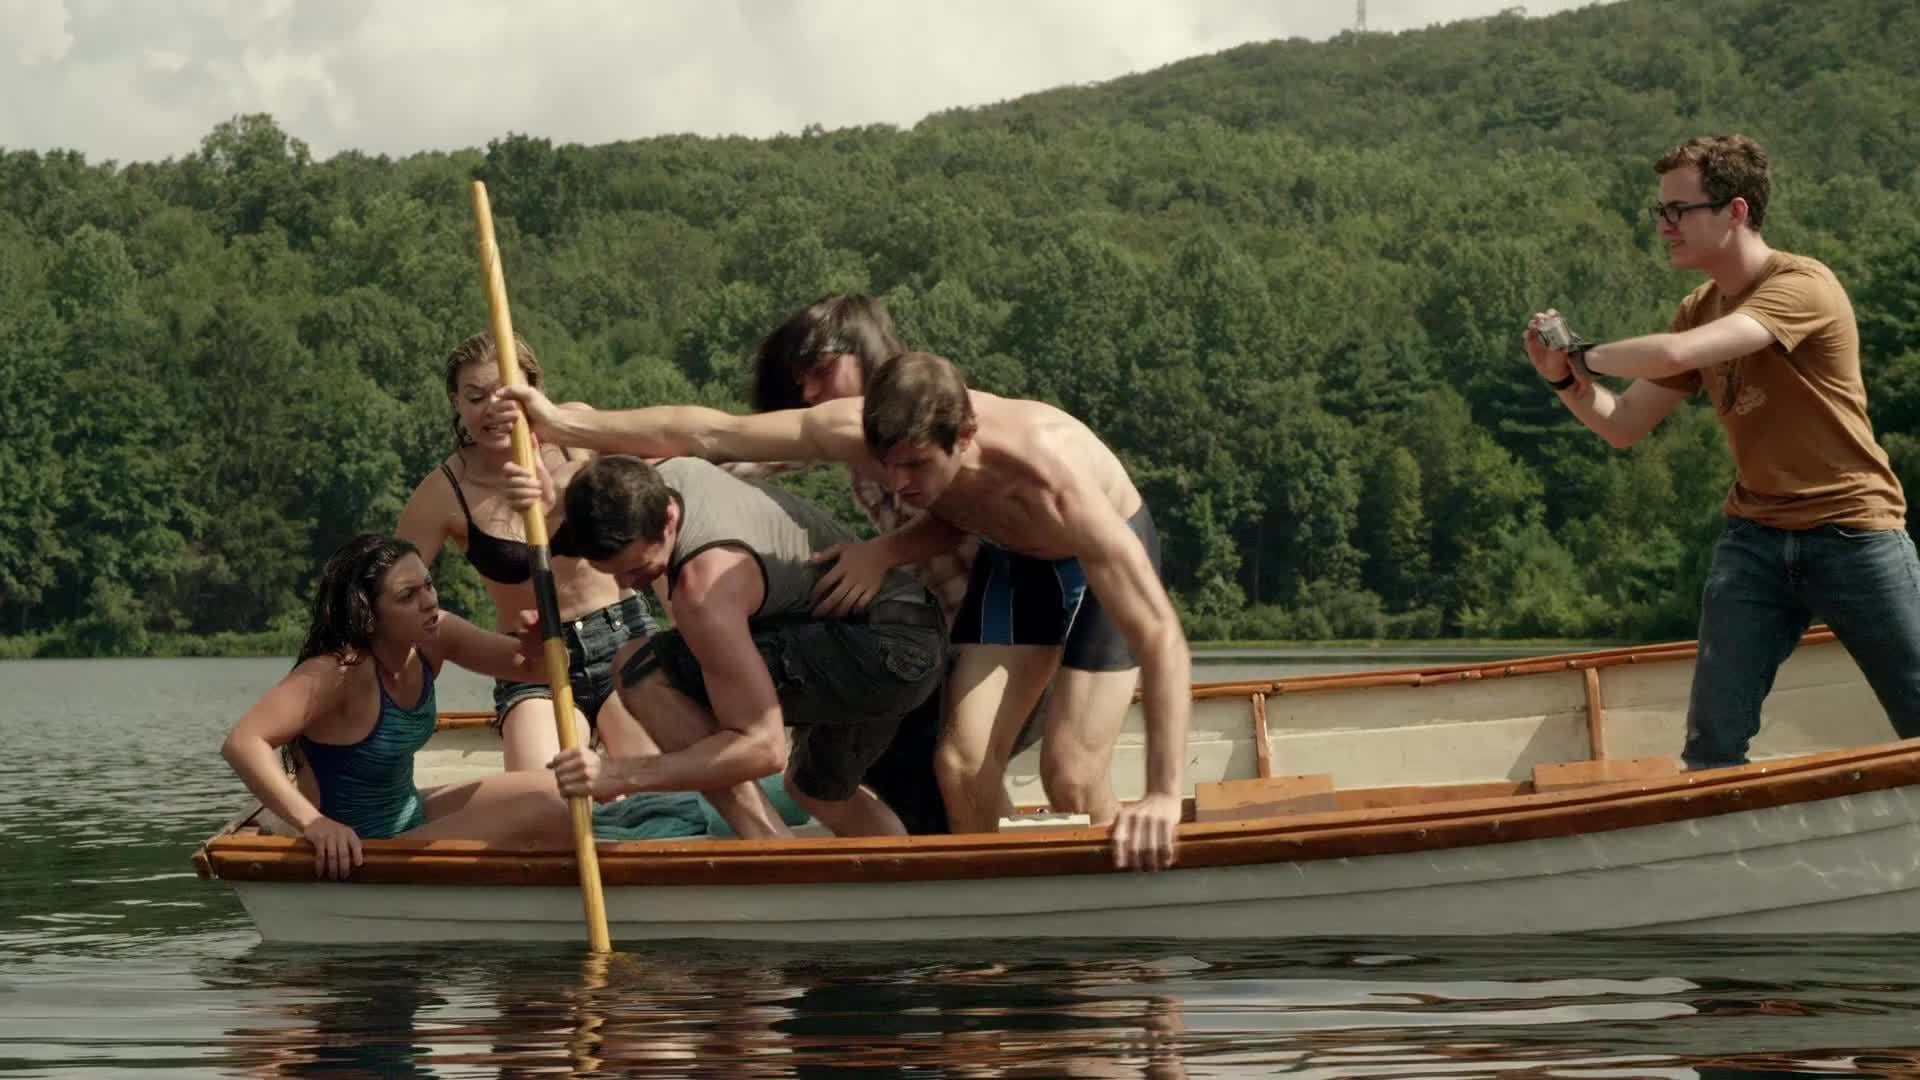 Teens stranded on a boat in a lake - Mackenzie Rosman, Bonnie Dennison, Johnny Orsini, Daniel Zovatto, Chris Conroy and Griffin Newman in Beneath (2013)